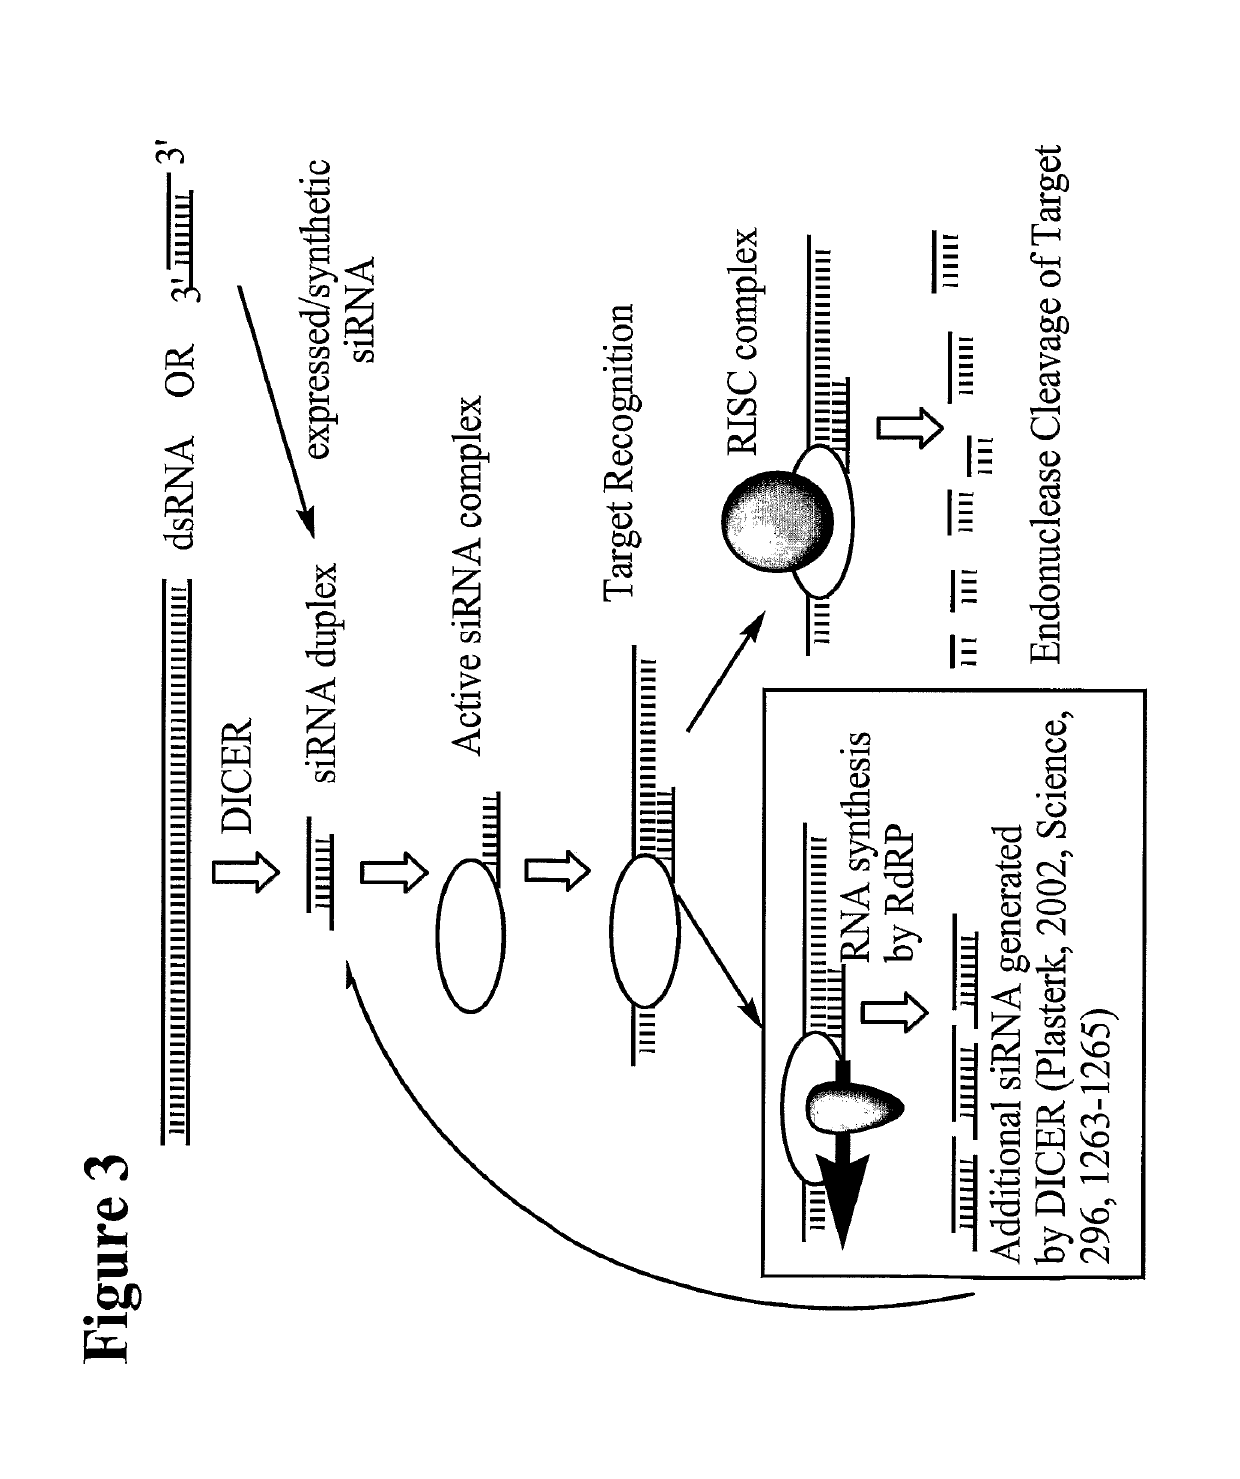 Chemically modified multifunctional short interfering nucleic acid molecules that mediate RNA interference